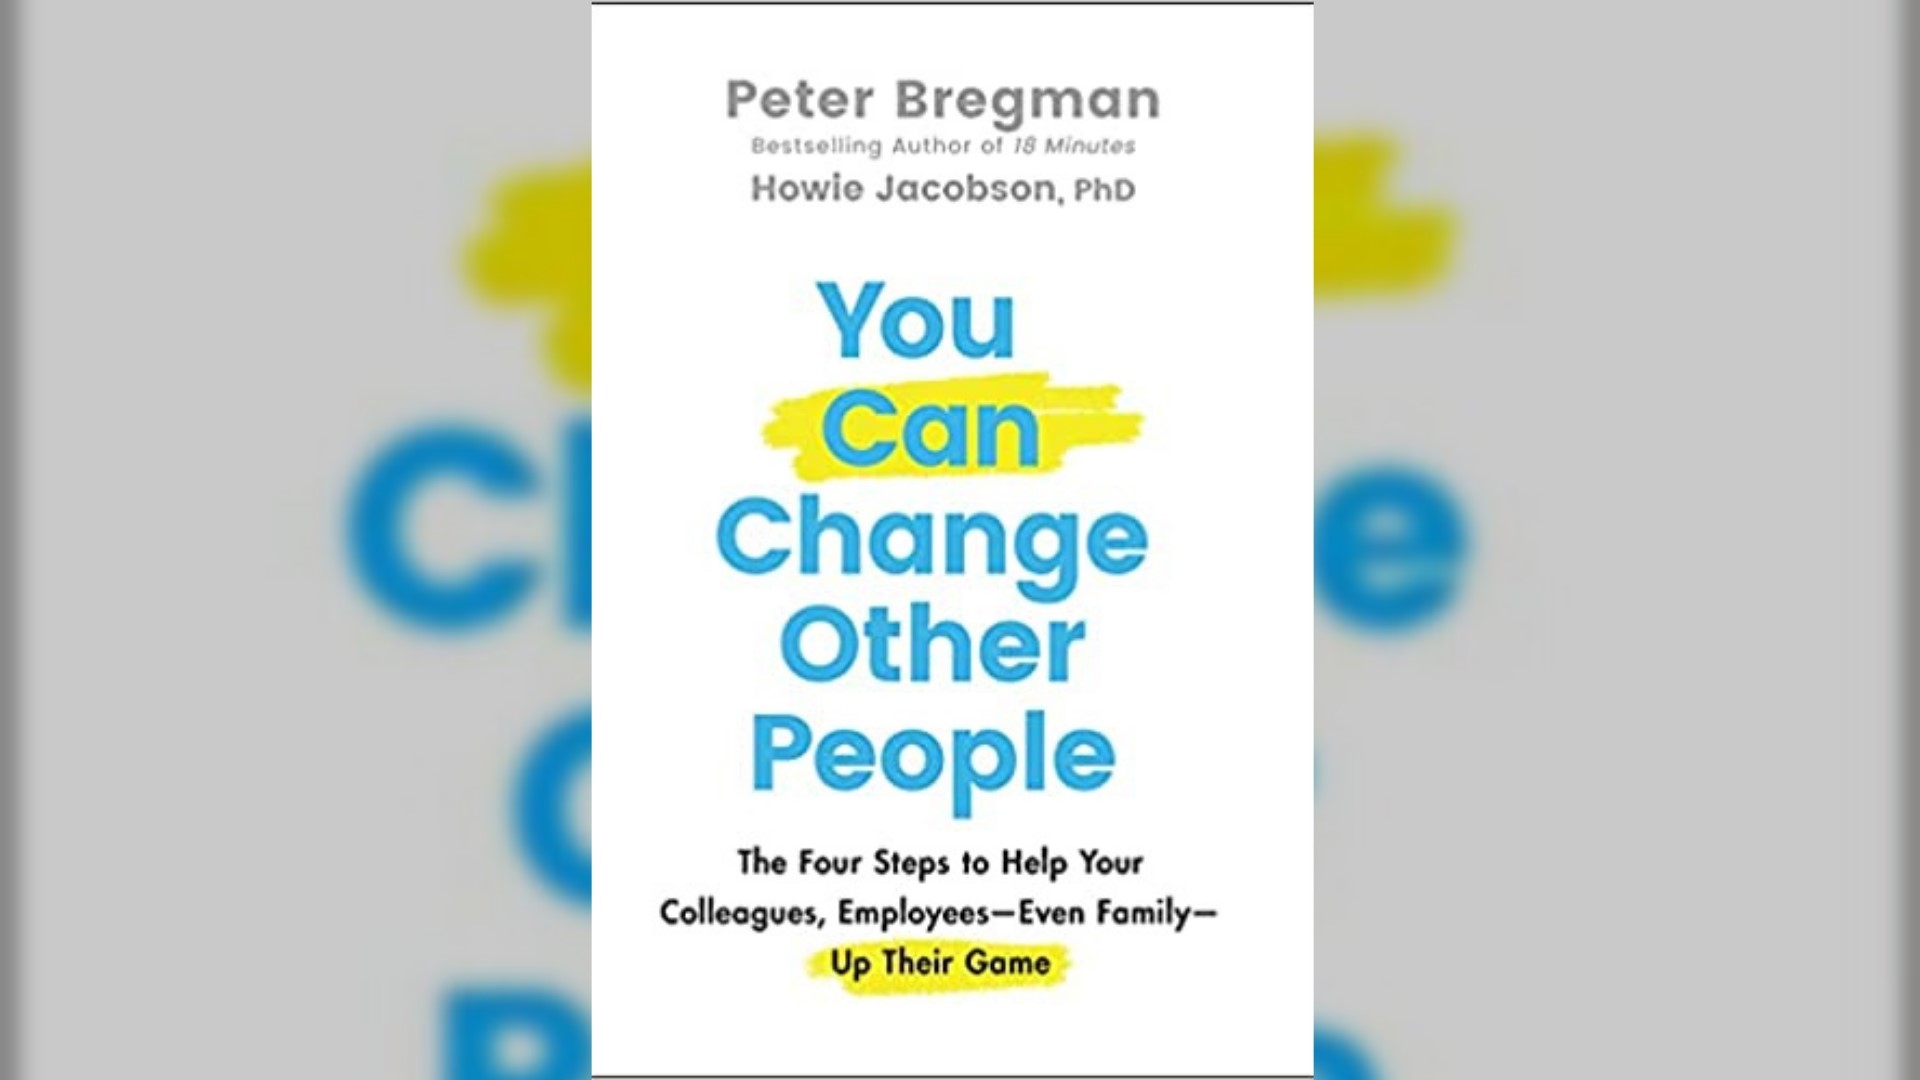 "You Can Change Other People: The Four Steps to Help Your Colleagues, Employees—Even Family—Up Their Game" highlights a new approach to change. #newdaynw